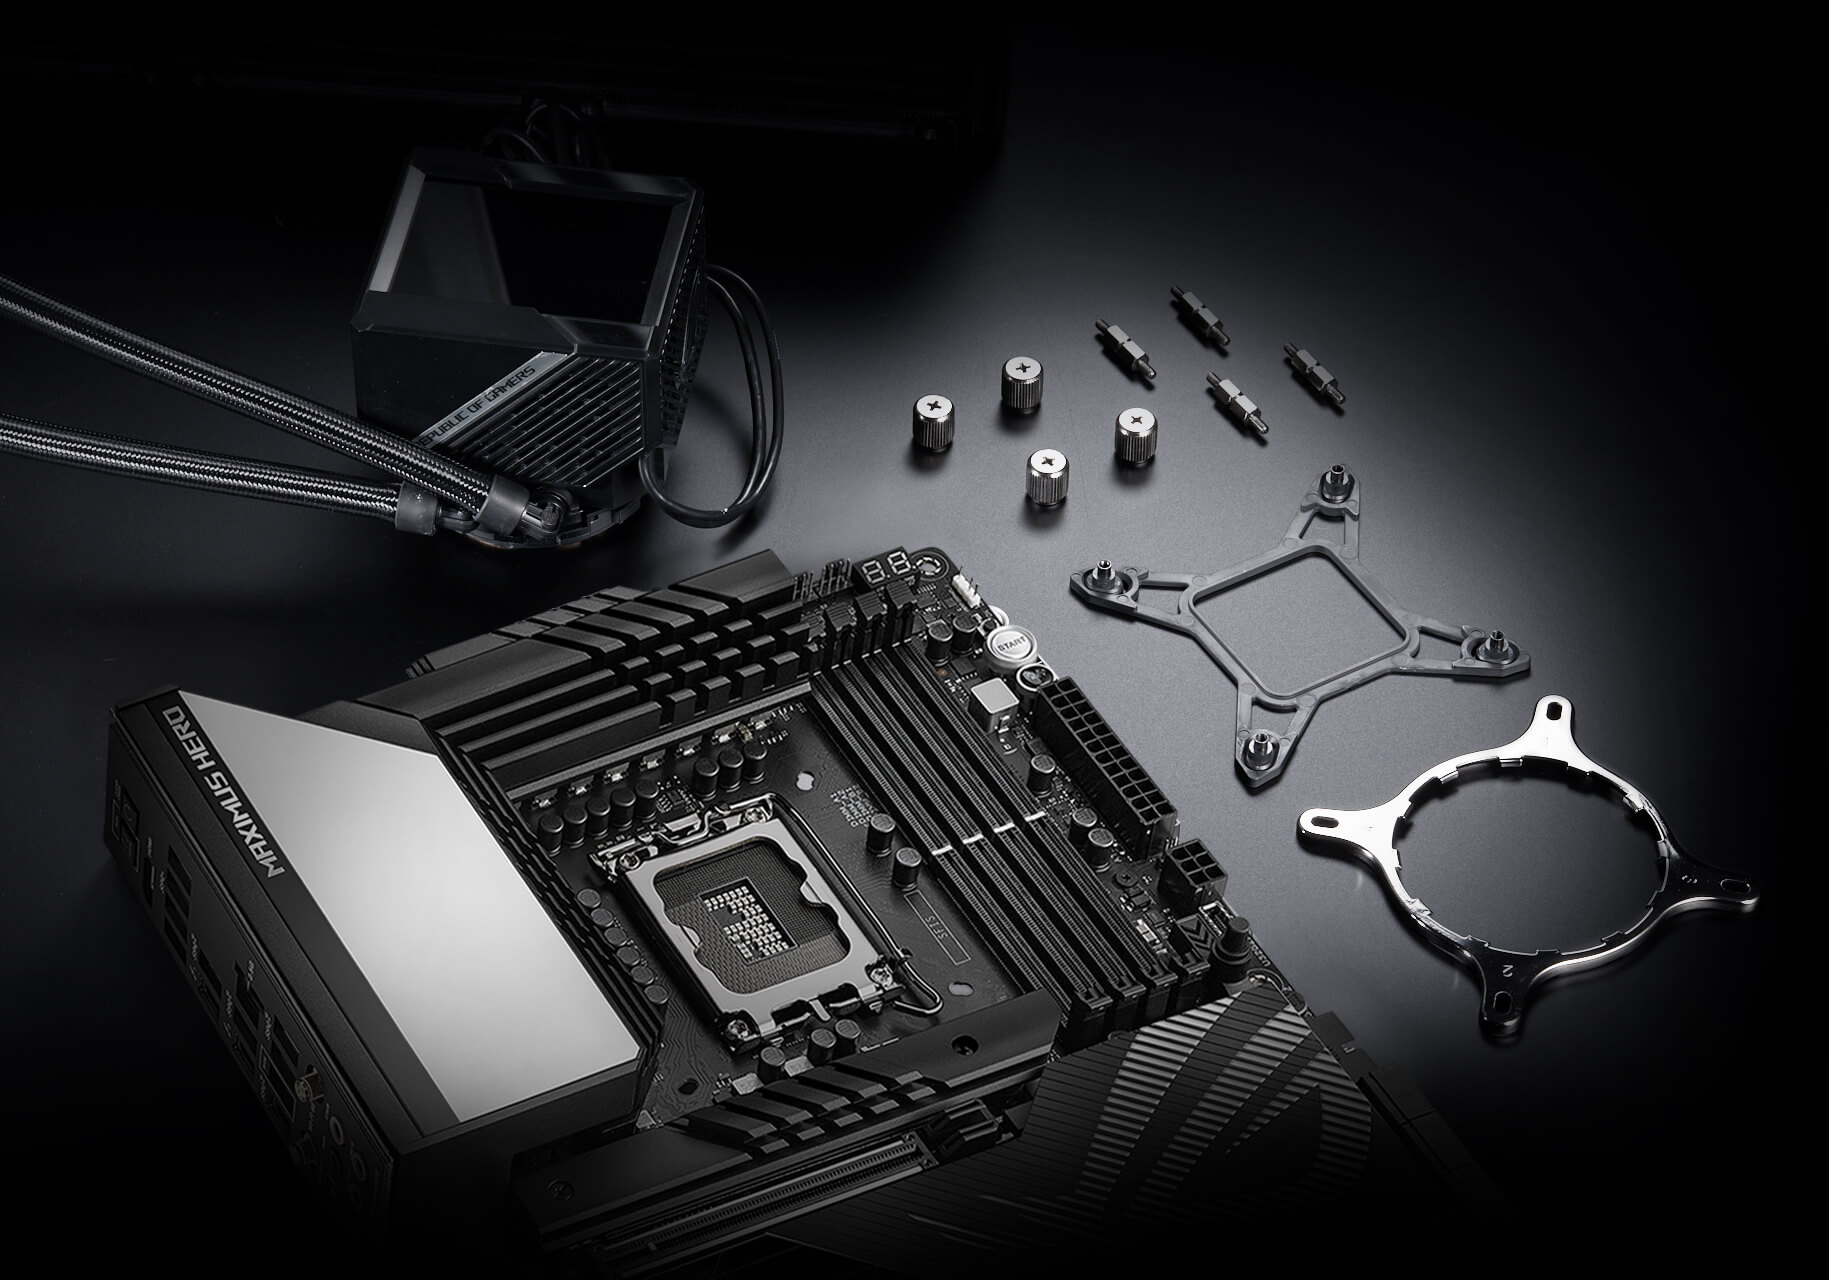 The ROG Maximus Z790 Hero is compatible with all ASUS AIO coolers.